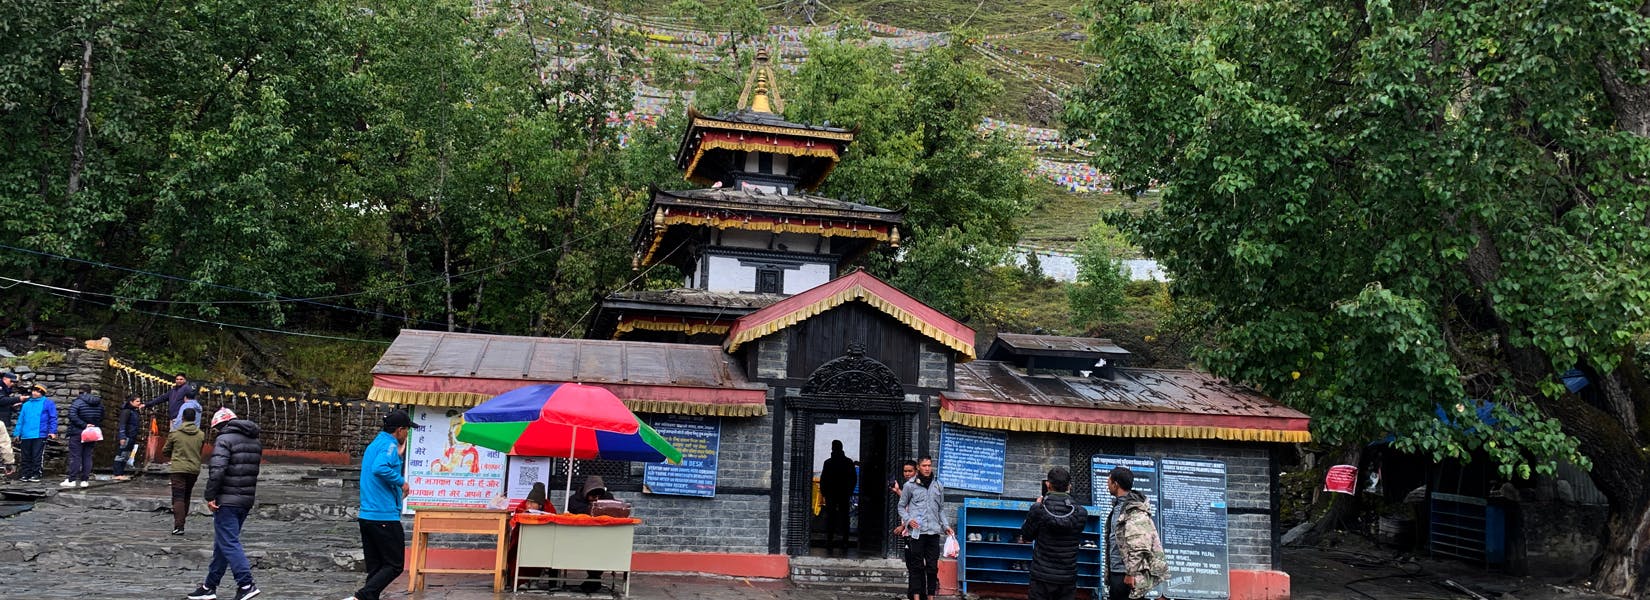 Muktinath Pilgrimage Tour Highlights: How to Book, What to Eat, Where to Sleep Along with Guide Cost and Itinerary